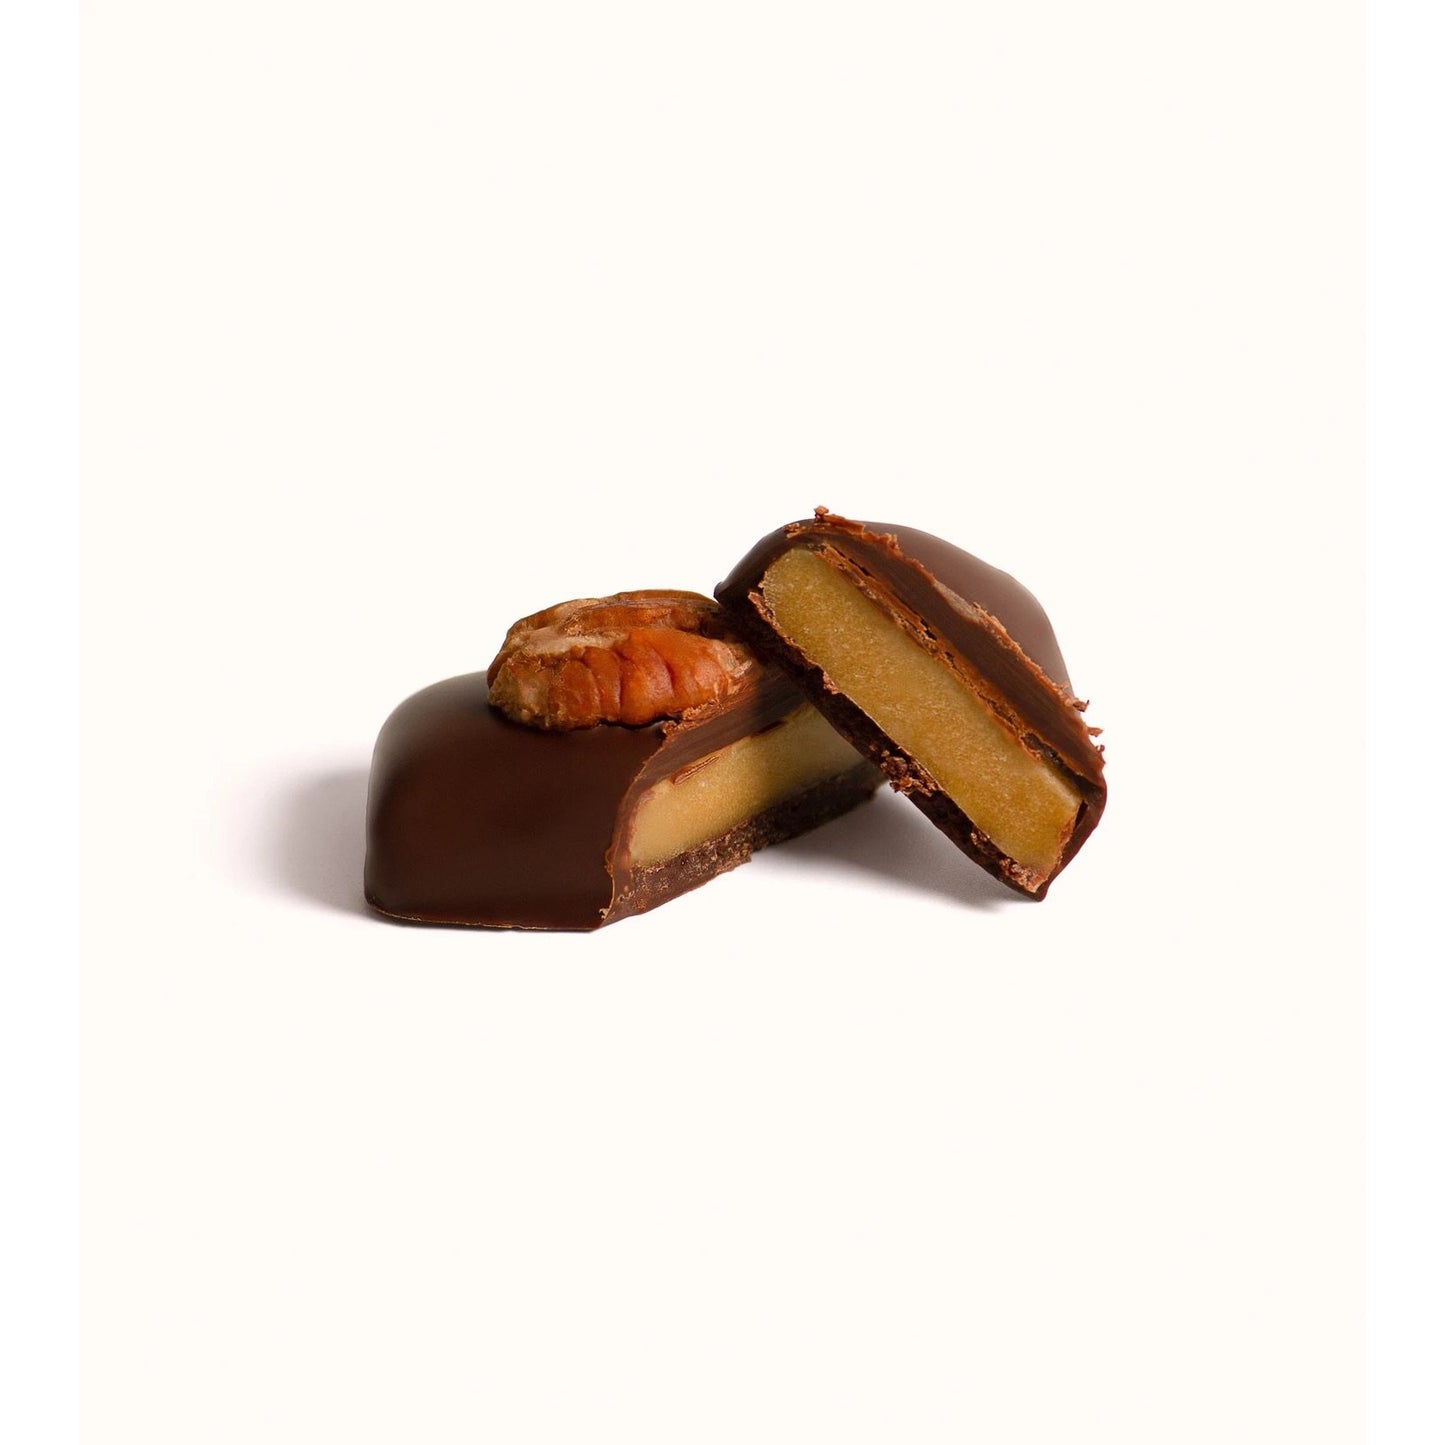 Butter Caramel Pecan Chocolate by Loco Love